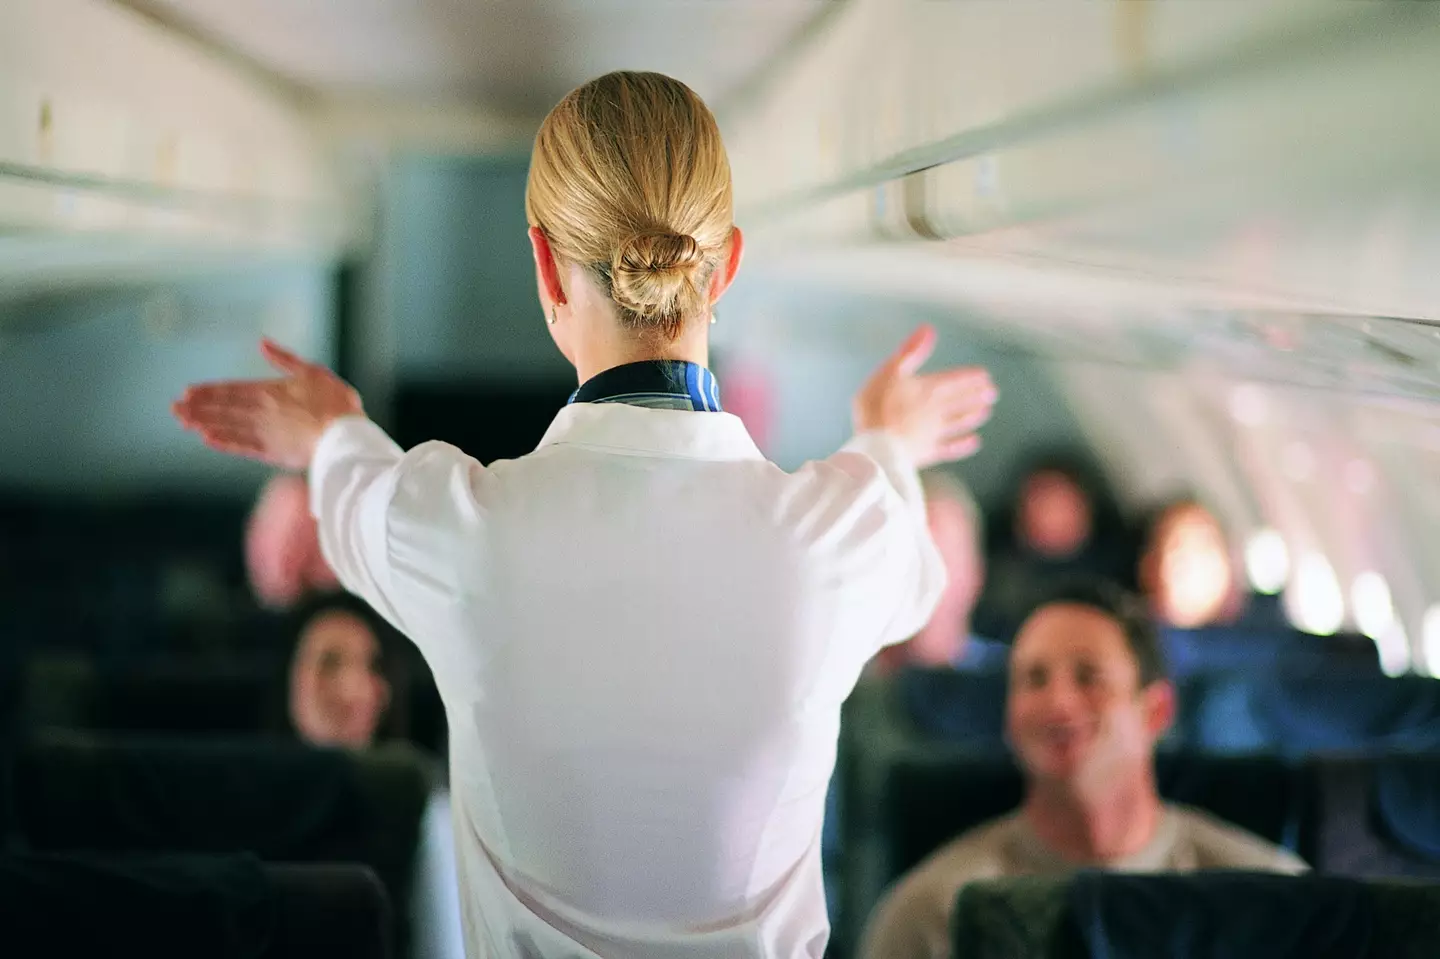 It's always important to treat flight attendants with respect. Getty Stock Image